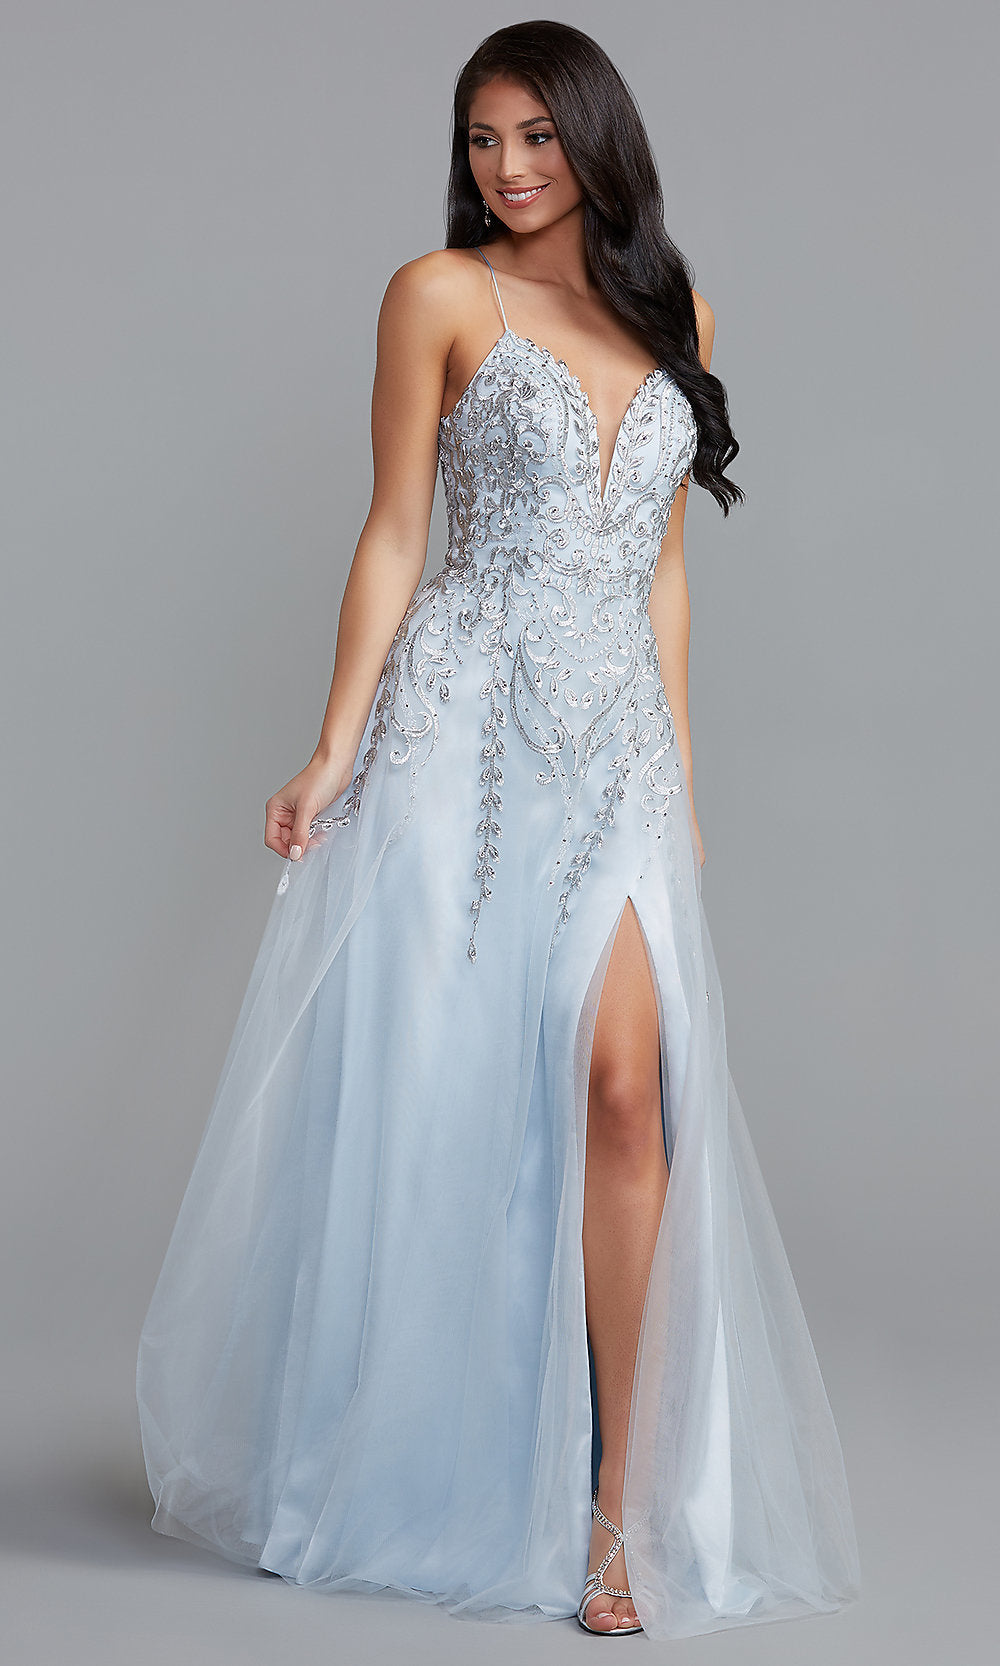 Pale Blue/Silver Metallic-Embroidered Long Corset-Back Prom Dress